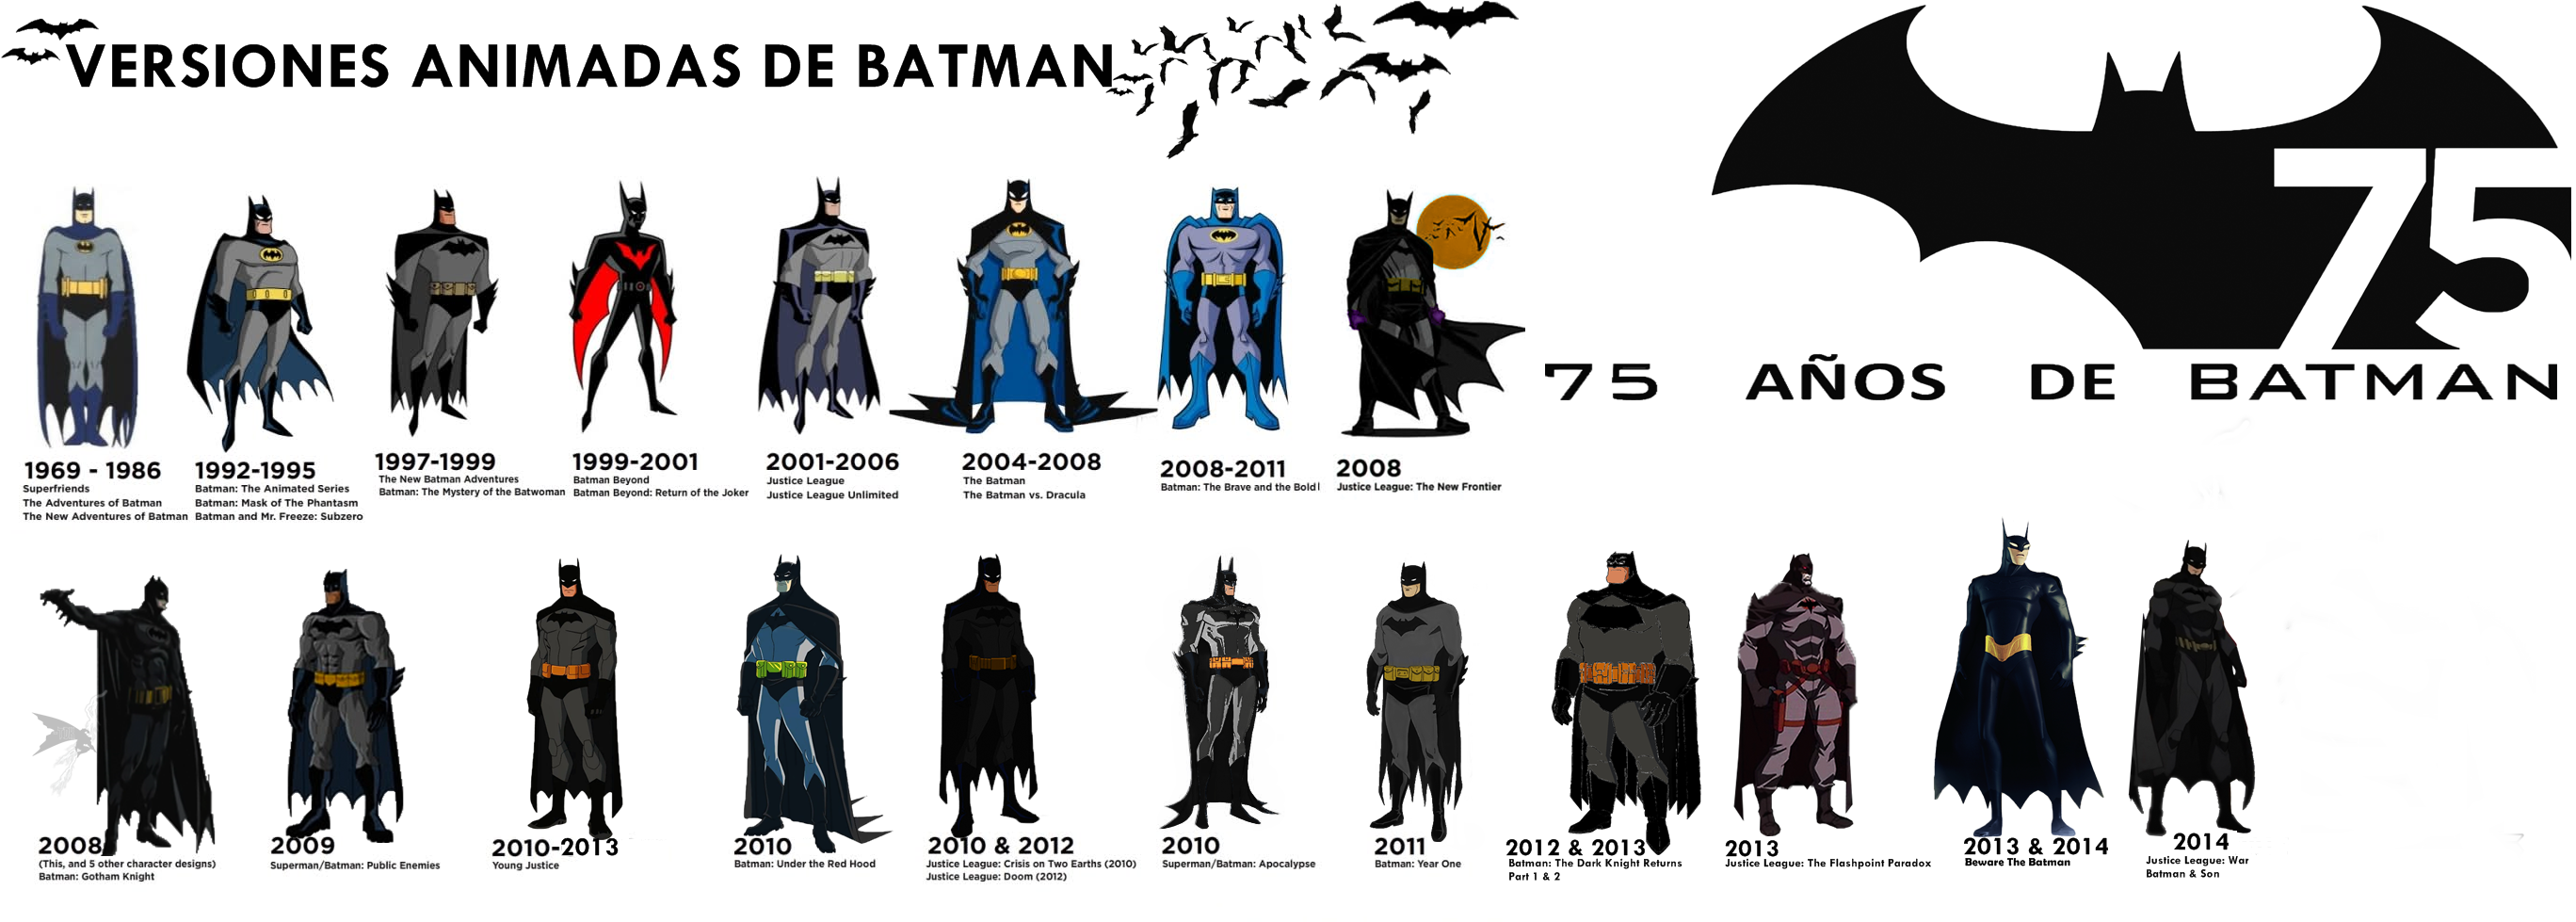 75 Years of Batman (Only Animated Versions) by Alexbadass on DeviantArt